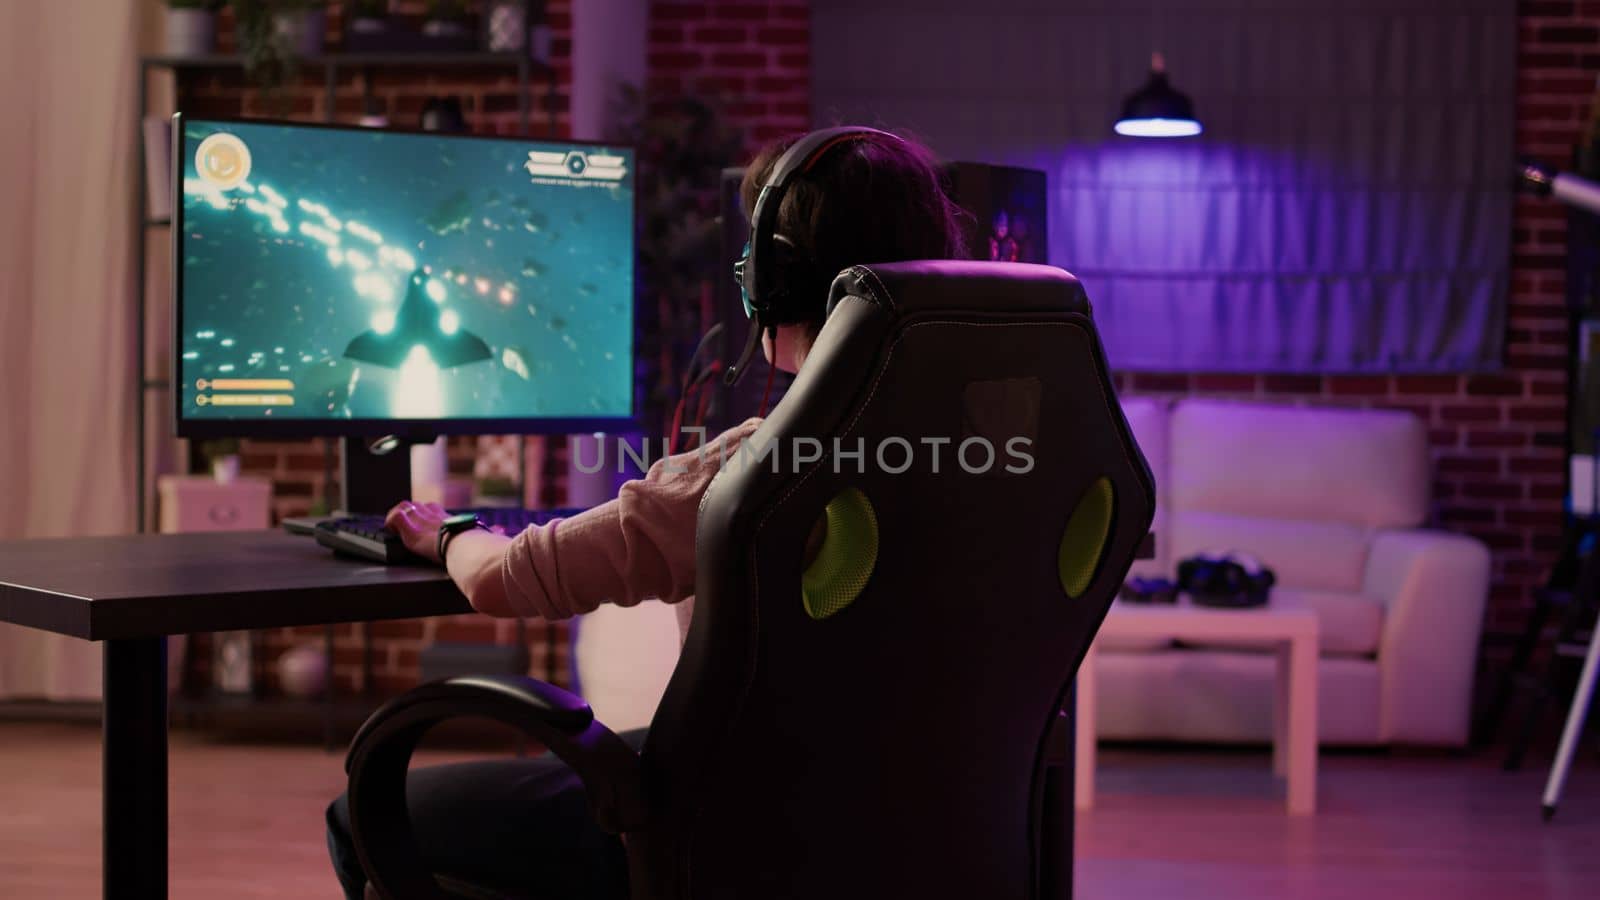 Over shoulder view of gamer girl relaxing playing rpg action game on professional pc setup while talking using headset. Woman streaming on internet fast paced space shooter simulation gameplay.